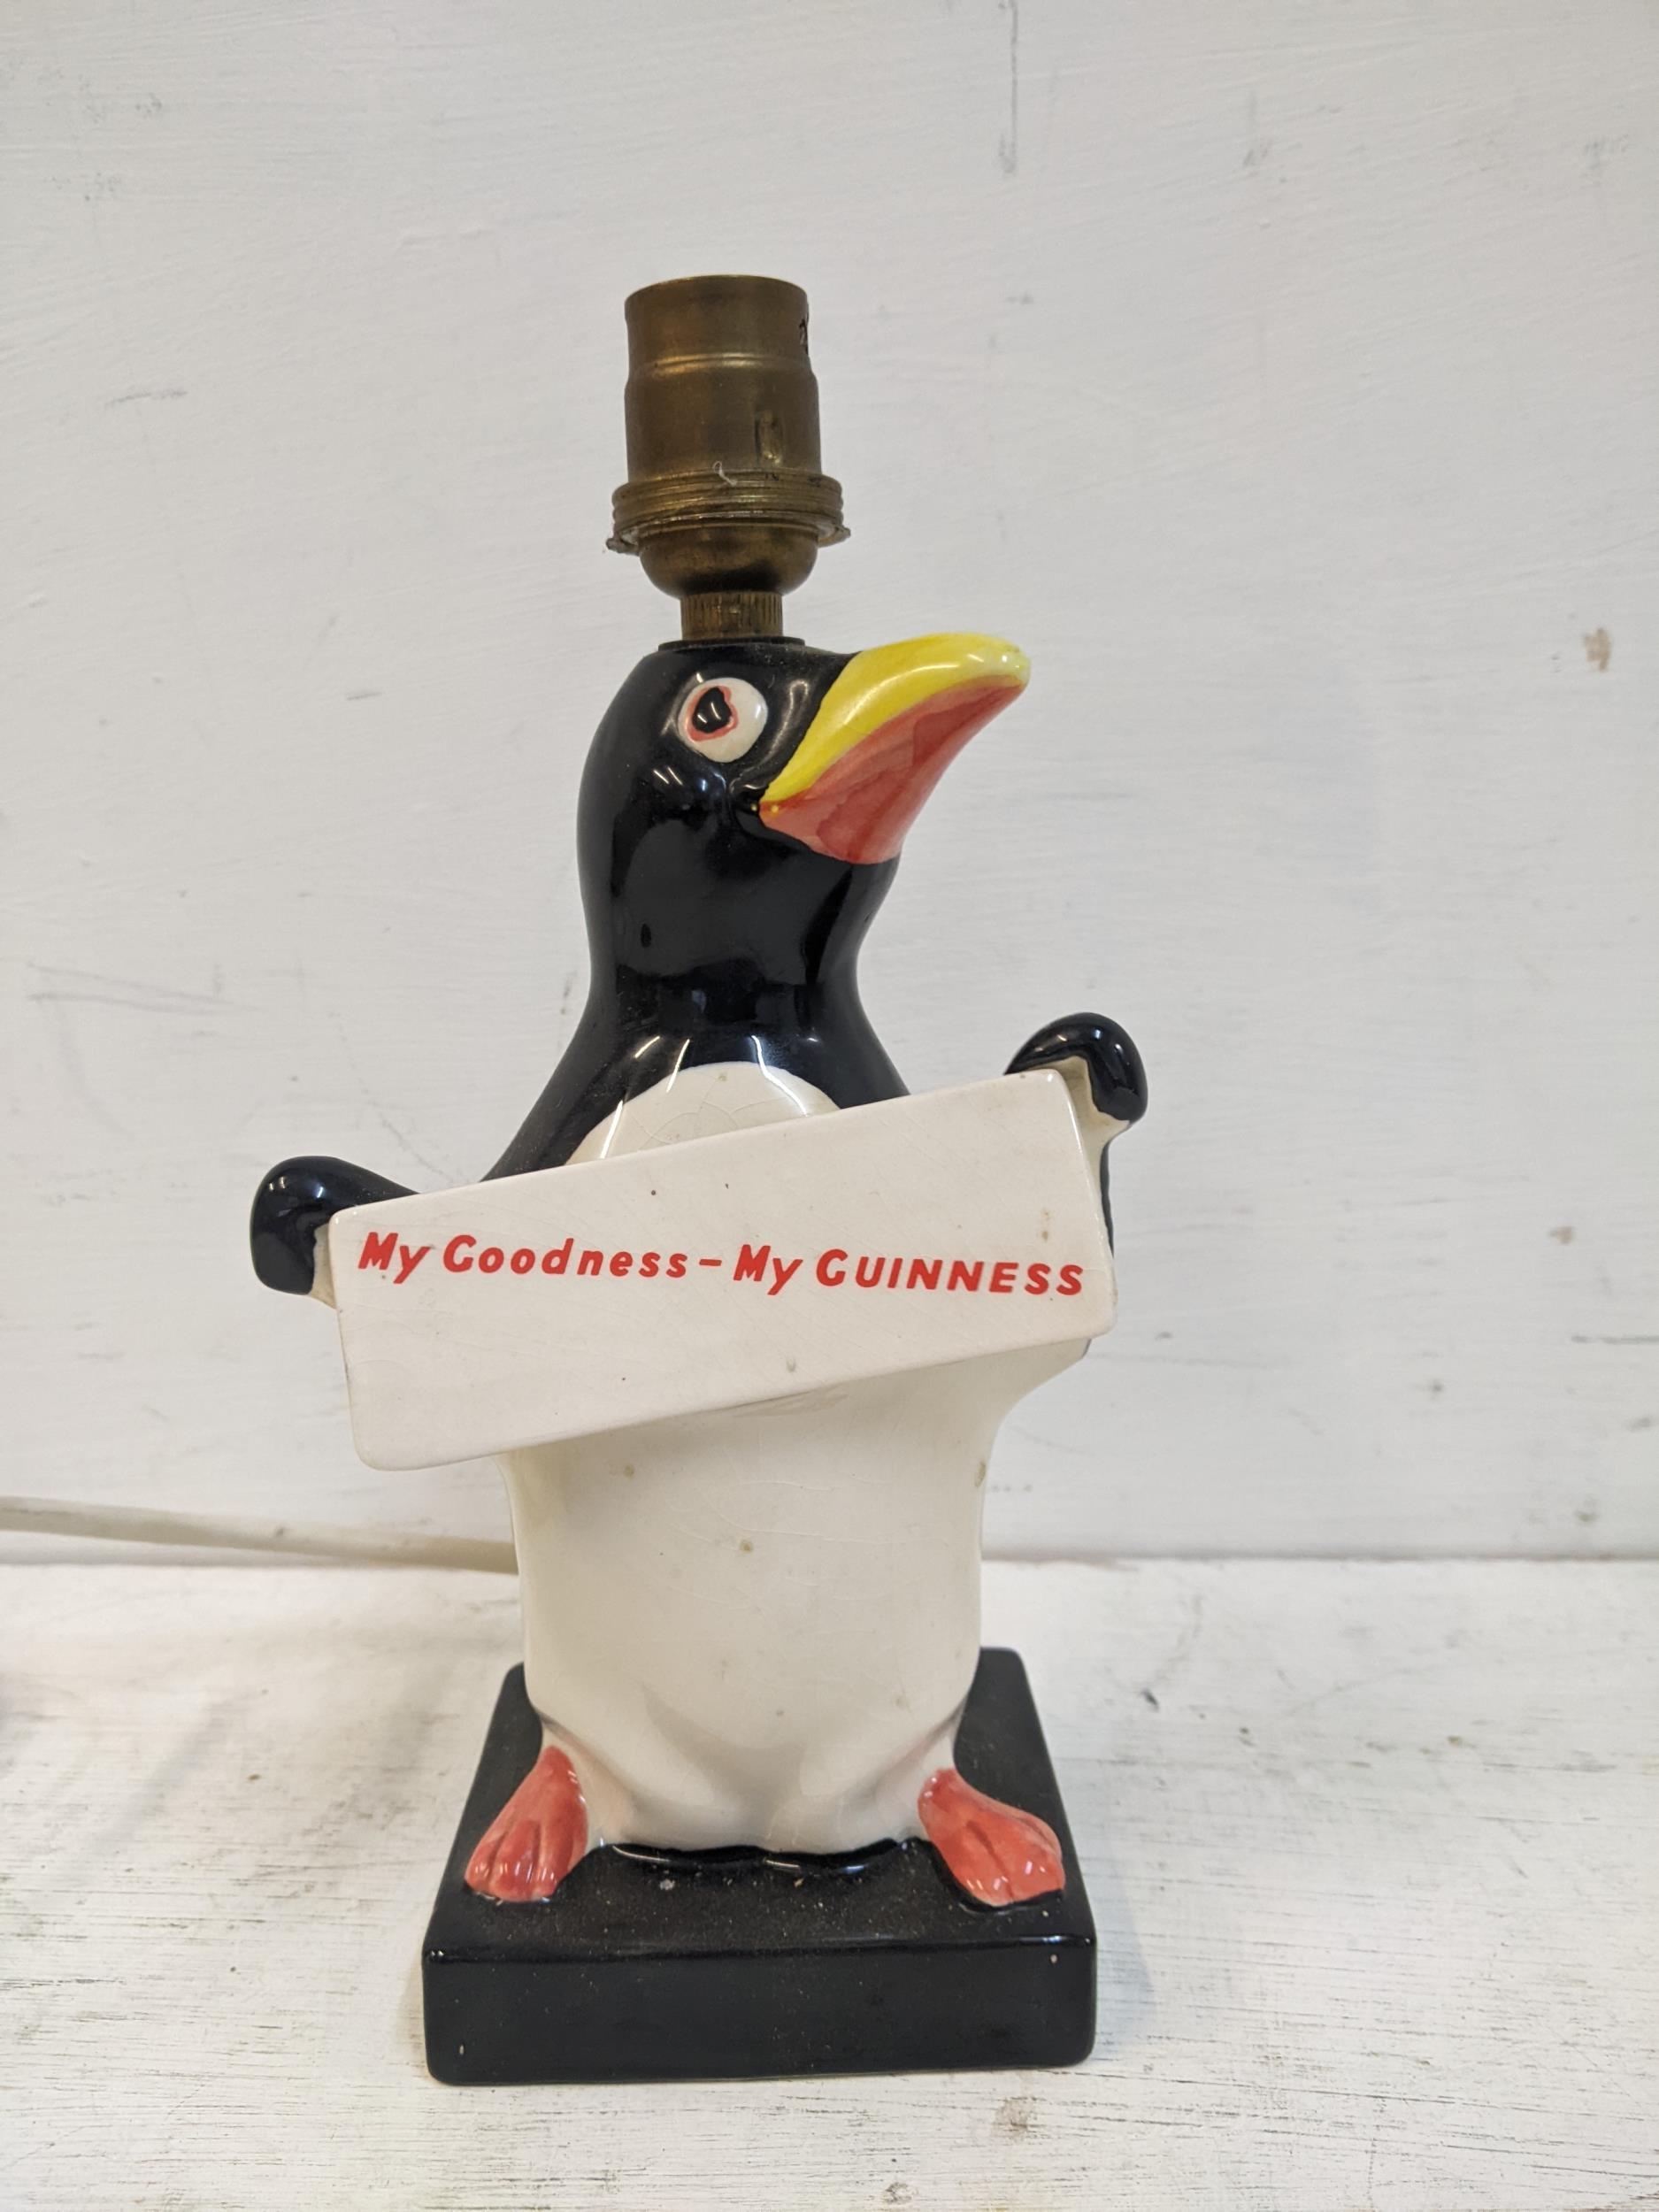 A Carlton ware Guinness advertising lamp in the form of a Penguin My Goodness - My Guinness